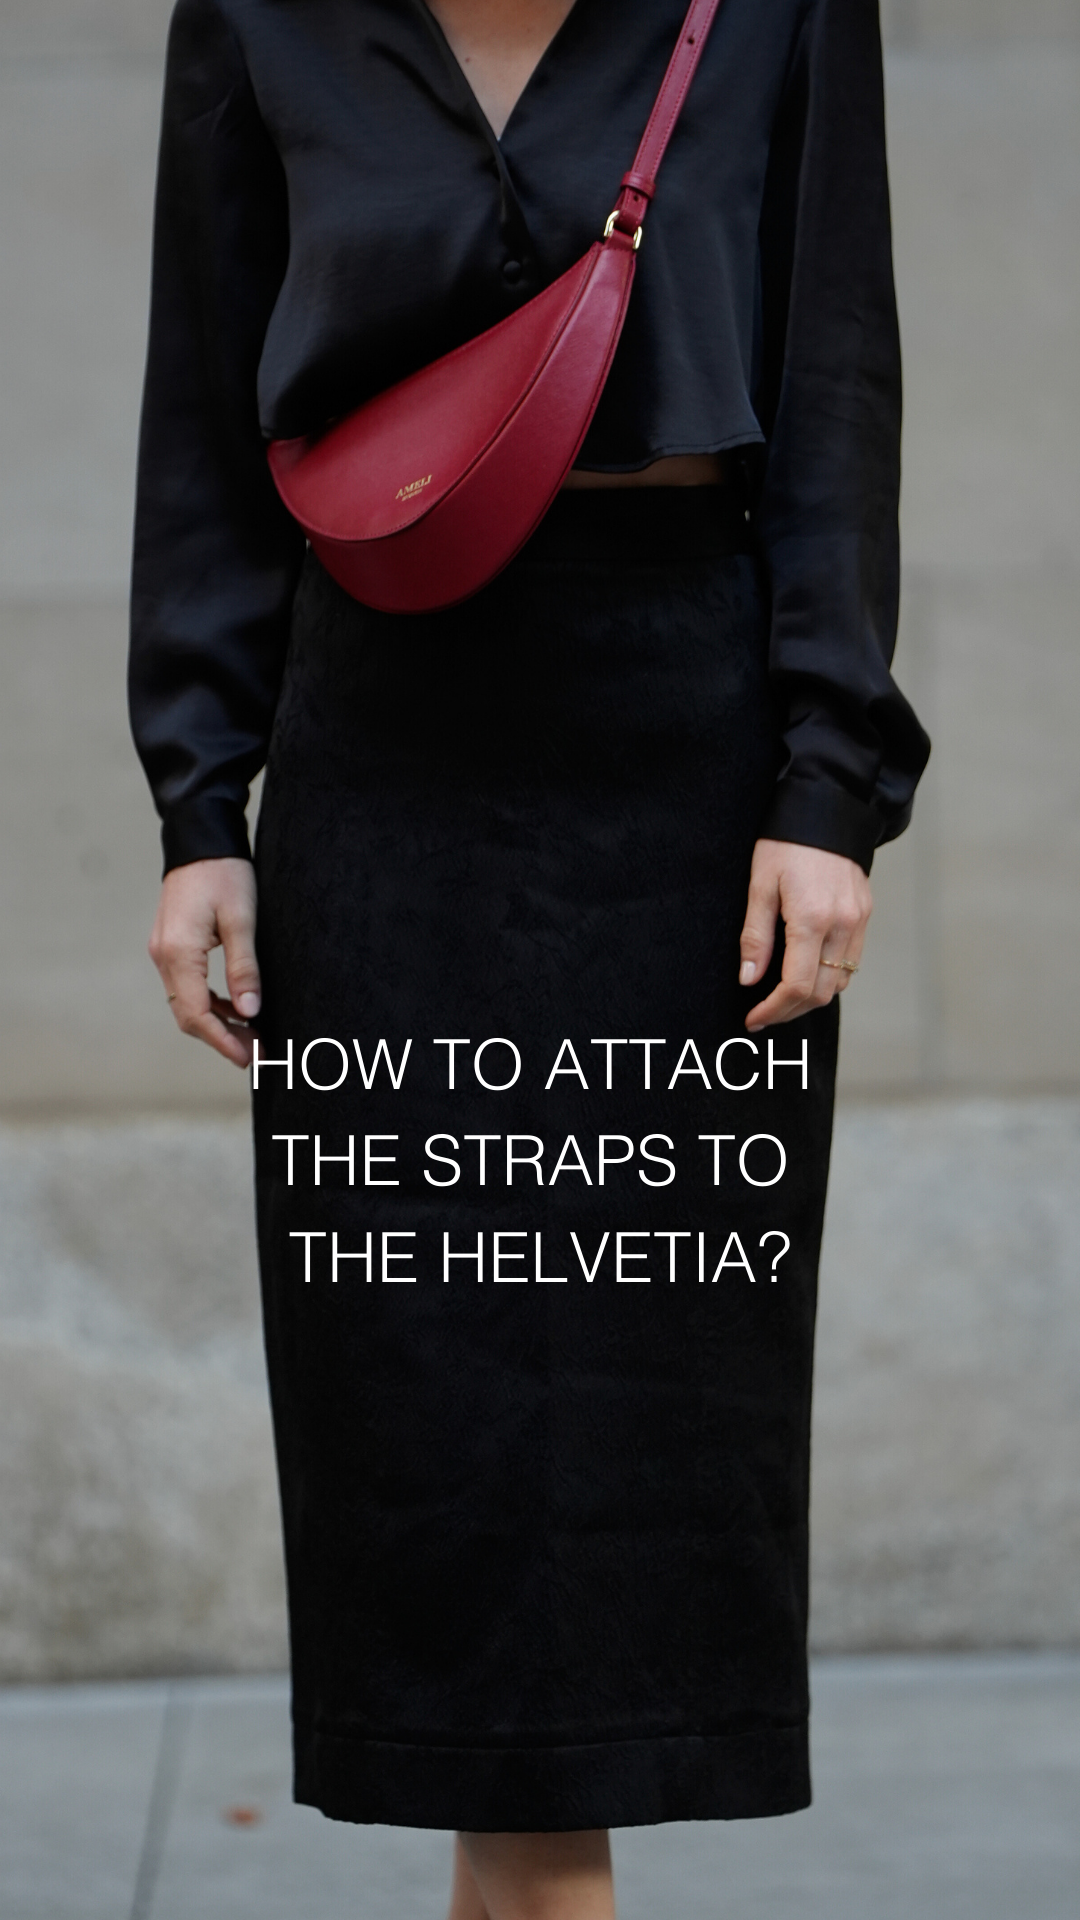 How to attach the straps to your HELVETIA bag